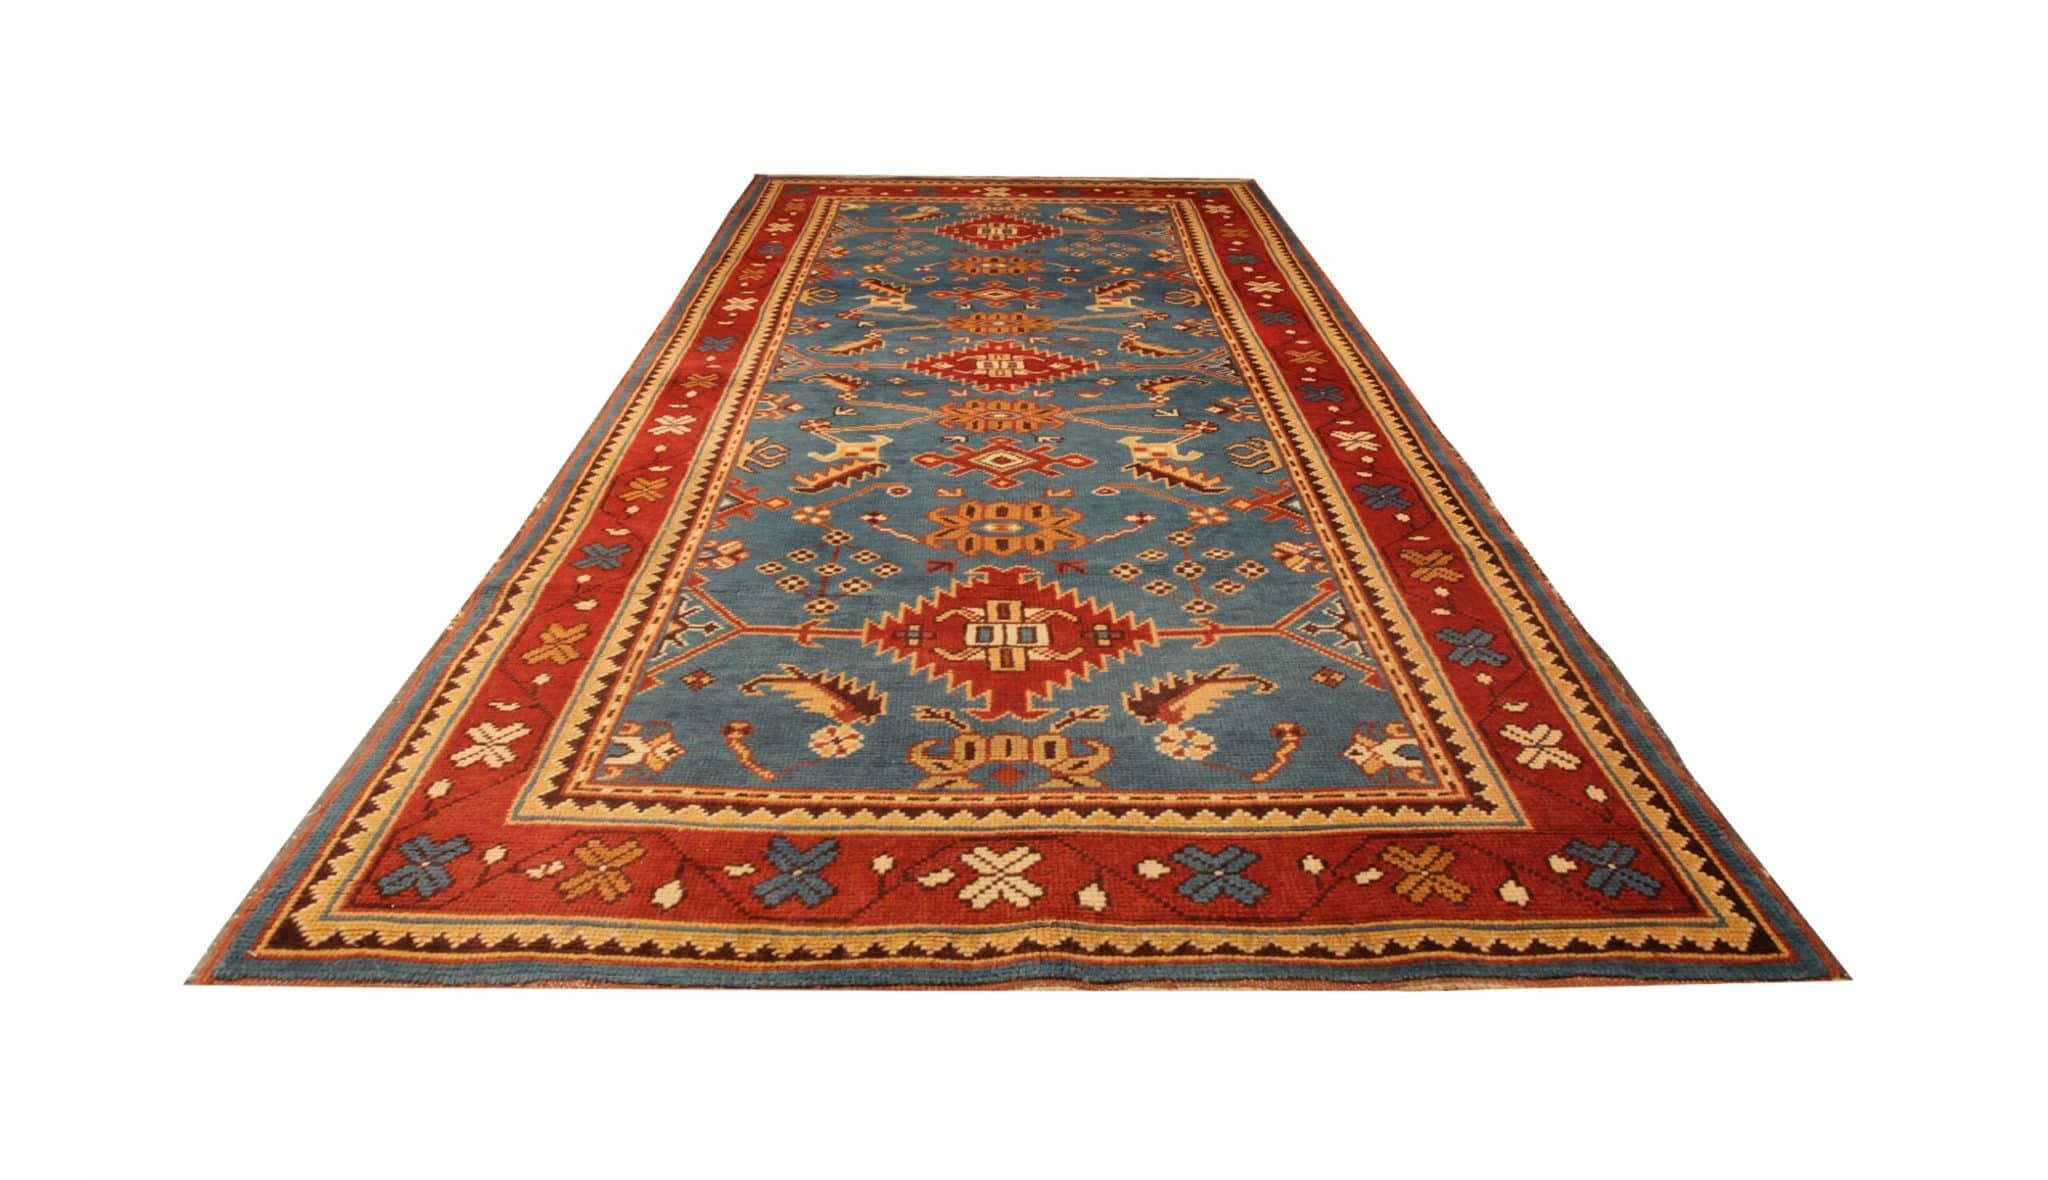 20th Century Vintage Rugs, Turkish Rugs, Oushak Carpets, Handmade Oriental Rug for Sale For Sale